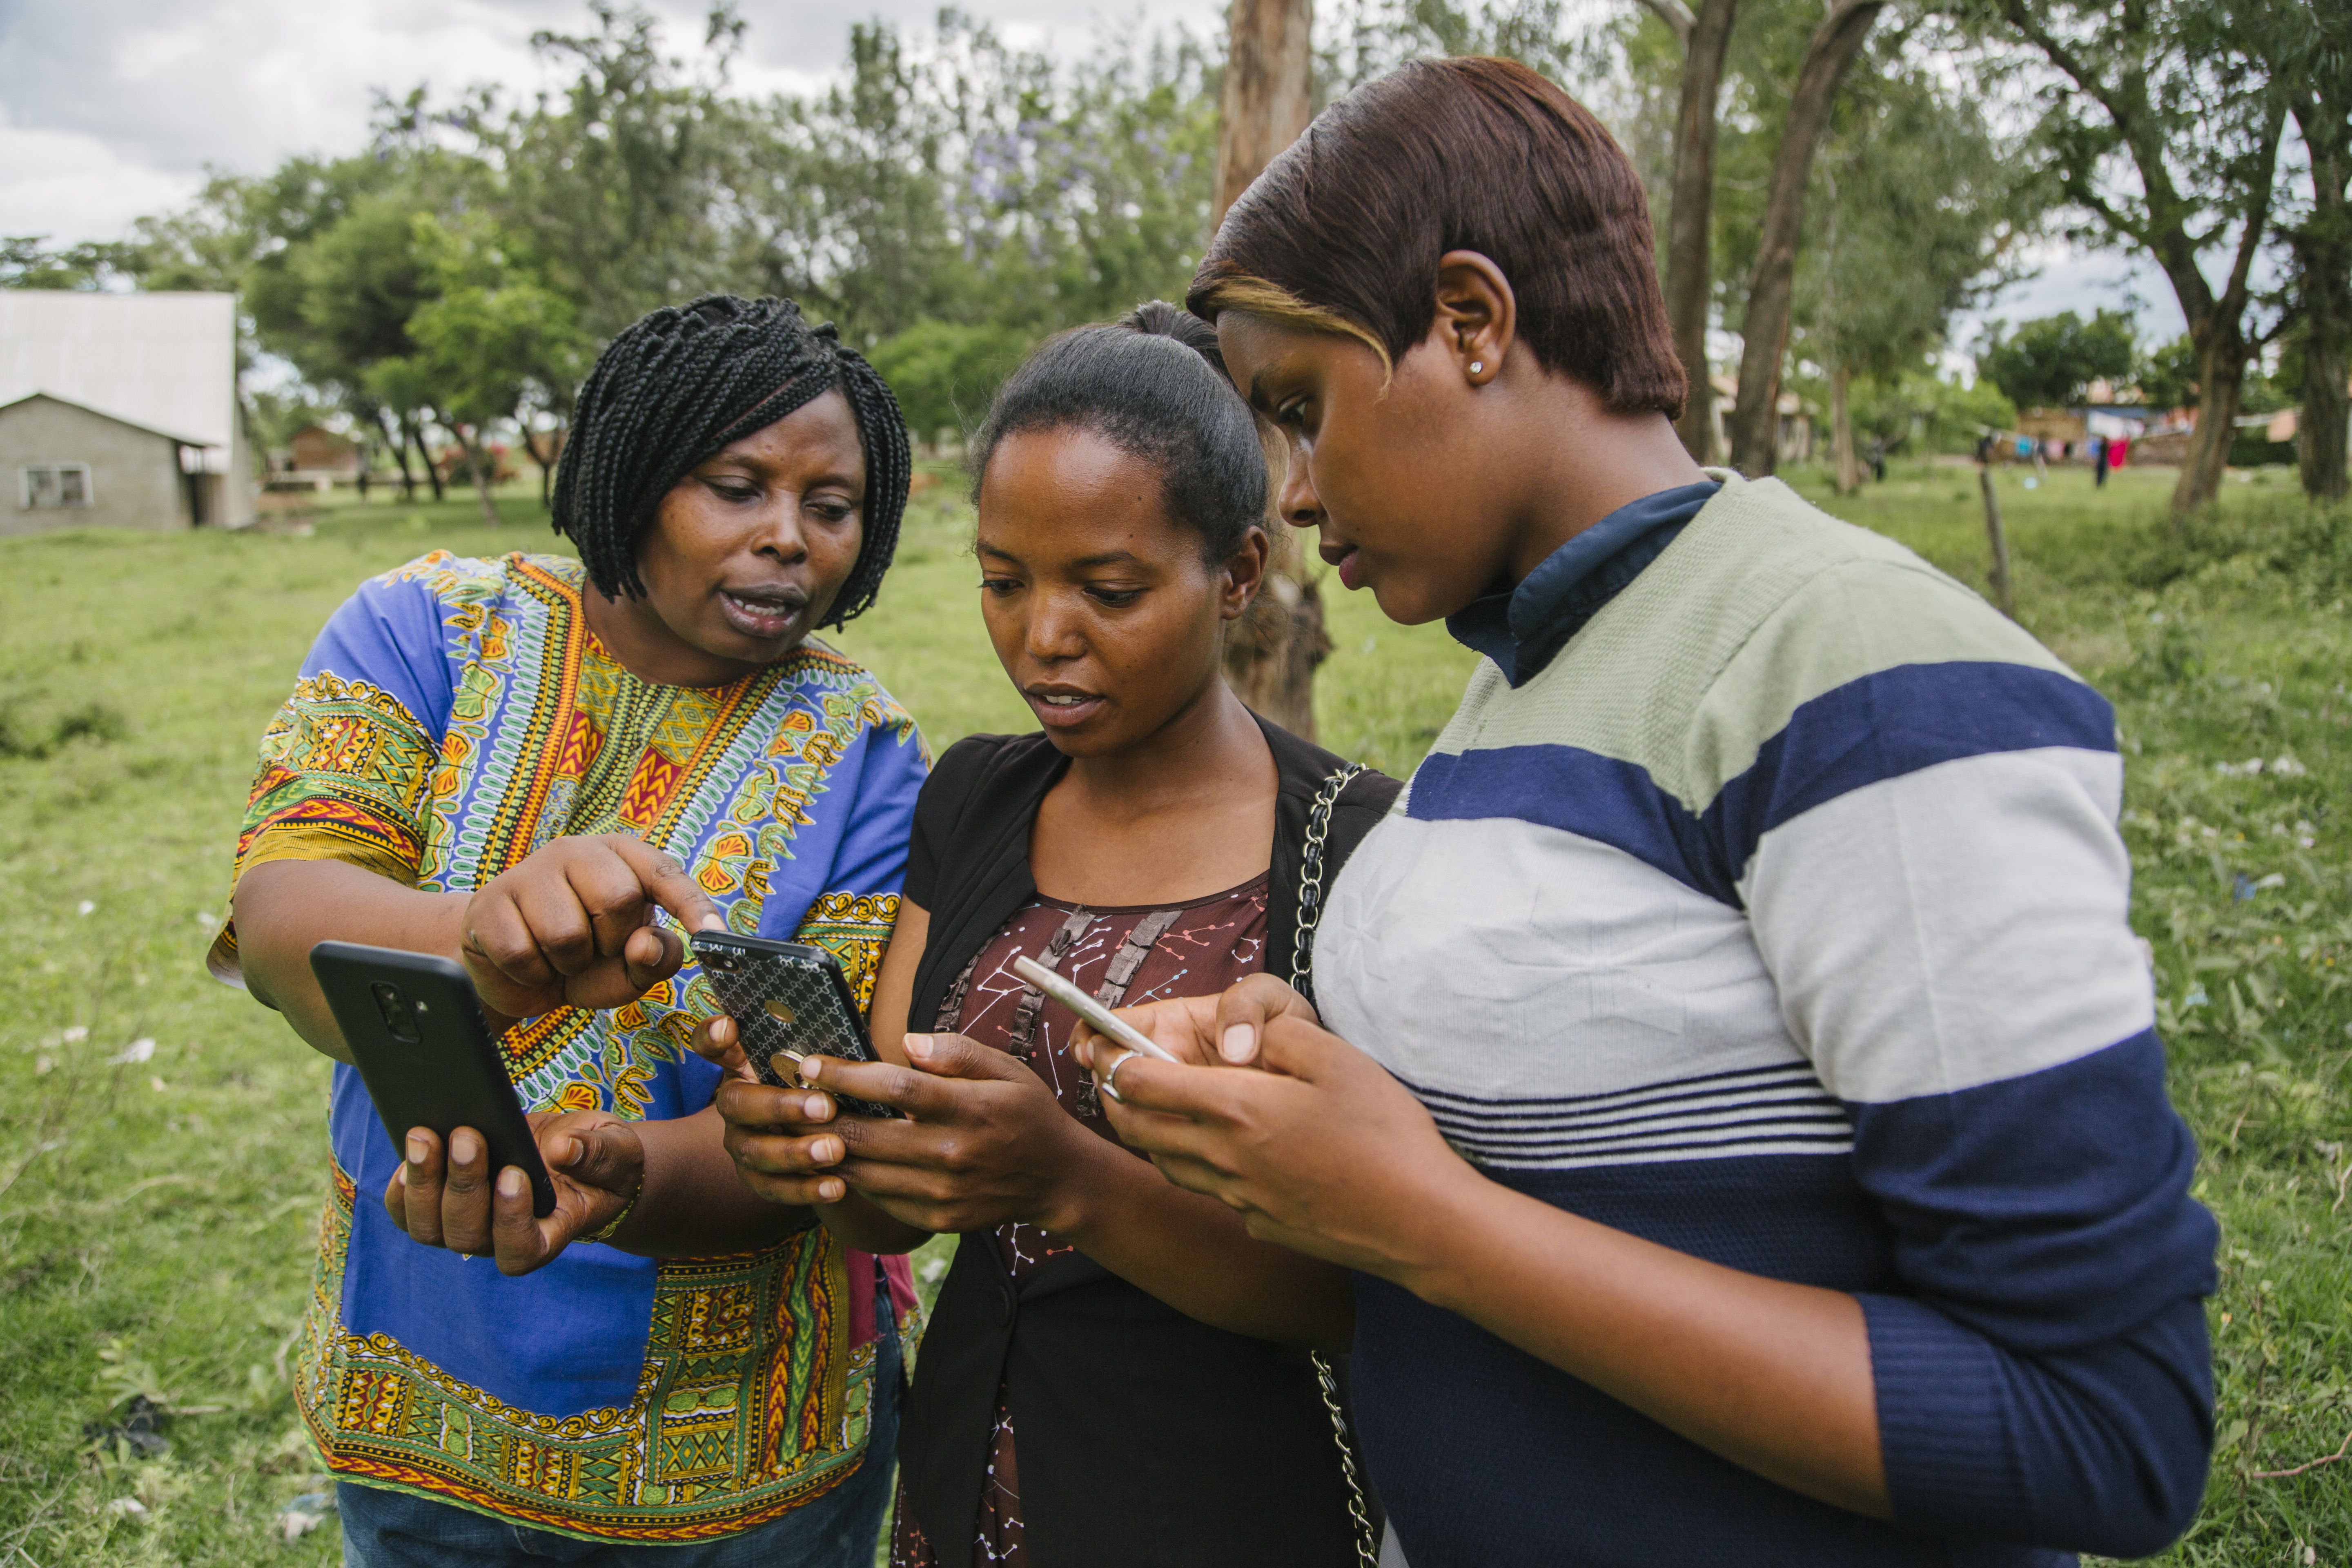 December 14, 2018: Mugumu, Tanzania: Rhobi Samwelly, [left] the director of the Hope Center Mugumu Safe House, trains two women from the northern Serengeti District of Tanzania on how to add data to the free, crowdsourced OpenStreetMap as part of a USAID grant to NGO Humanitarian OpenStreetMap Team (HOT). These entries, such as names of roads, schools, churches, and other points of interest, are helping create the first ever digital map of this part of Tanzania that can be used by citizens for an array of purposes. One crucial way the maps are being used are to help locate girls at risk of female genital mutilation, or FGM, which, though illegal, is still traditionally practiced in communities throughout the Serengeti. USAID supports HOT and the Hope Center Mugumu Safe House as part of its WomenConnect Challenge, launched in March 2018, to support solutions that empower women and girls to access and use digital technologies. Since 2015, HOT’s Crowd2Map project in Tanzania has been adding schools, hospitals, roads, buildings and villages to OpenStreetMap with the help of over 7500 volunteers worldwide and 600 locally. These maps are used by community activists to locate and protect girls at risk of FGM, as well as providing local officials data needed to plan for the development of services. / Photo by Bobby Neptune for DAI